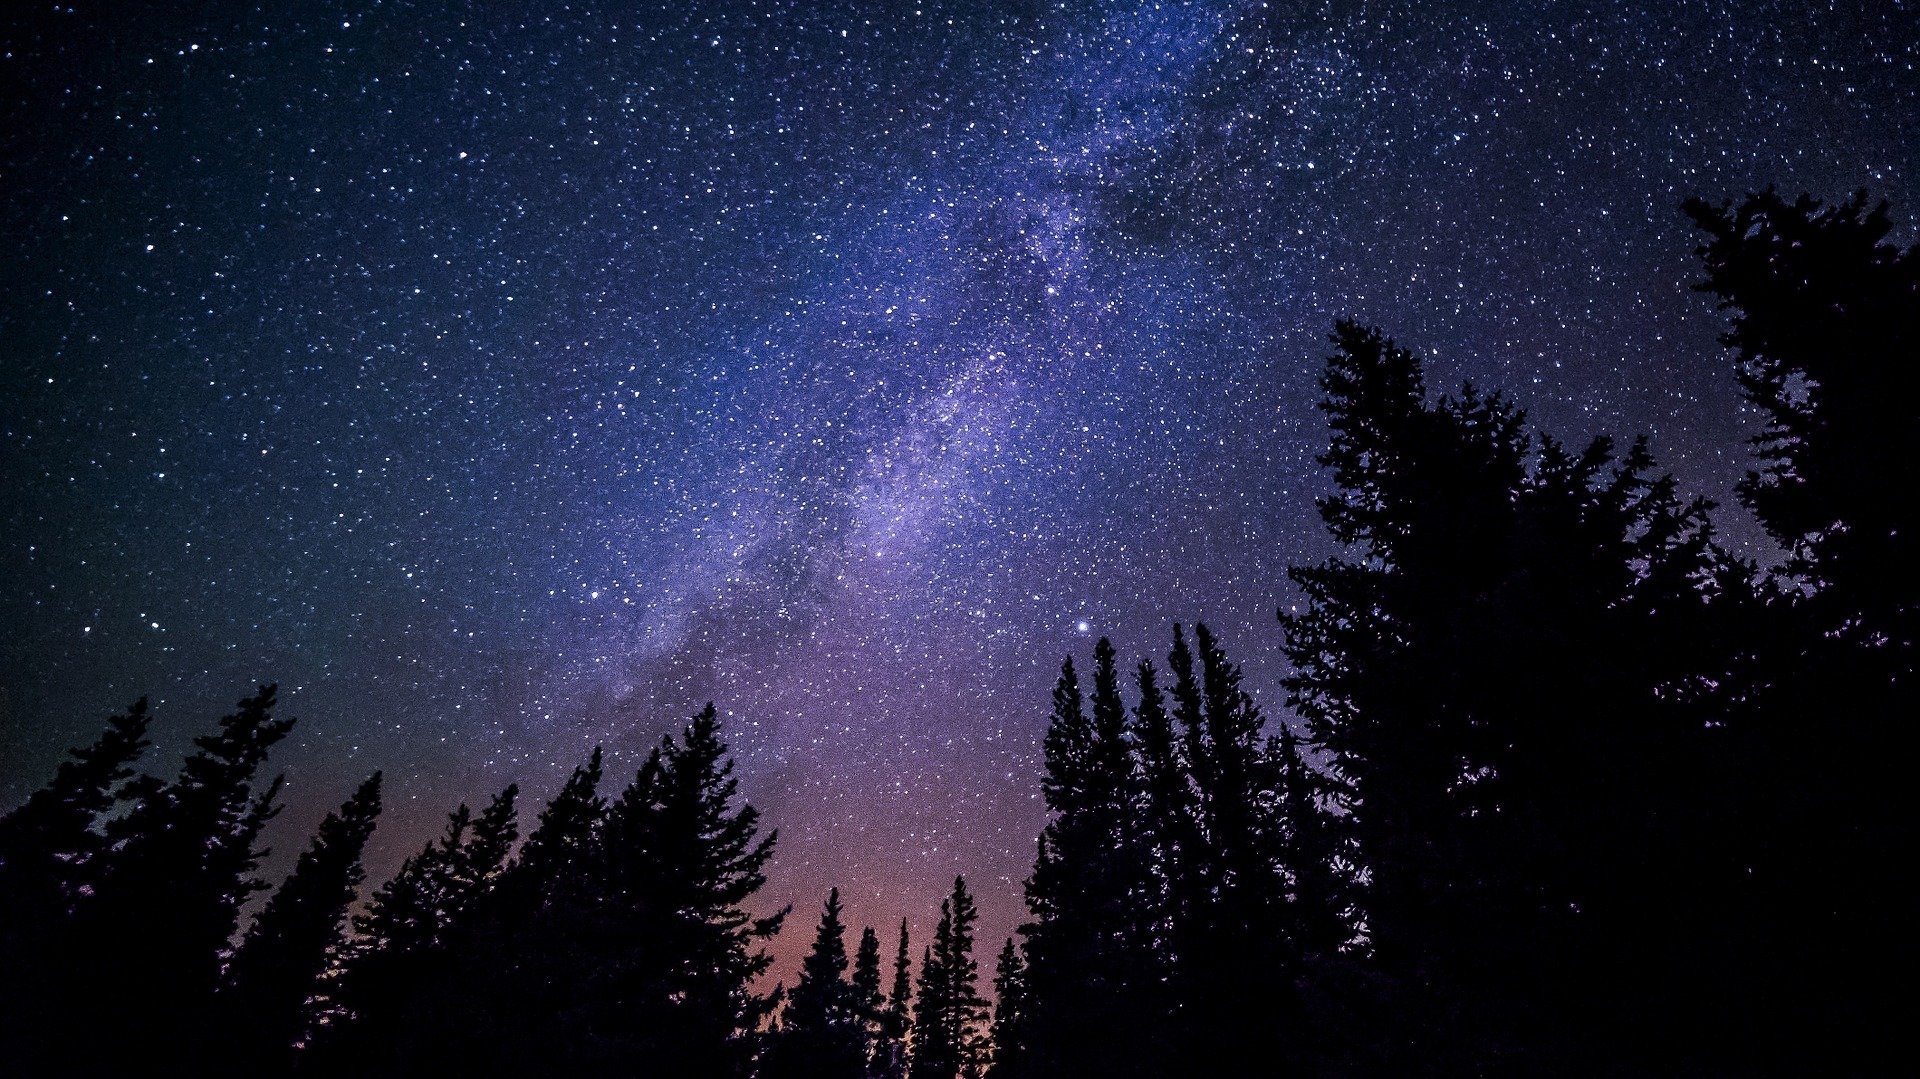 Milky Way with trees in foreground.